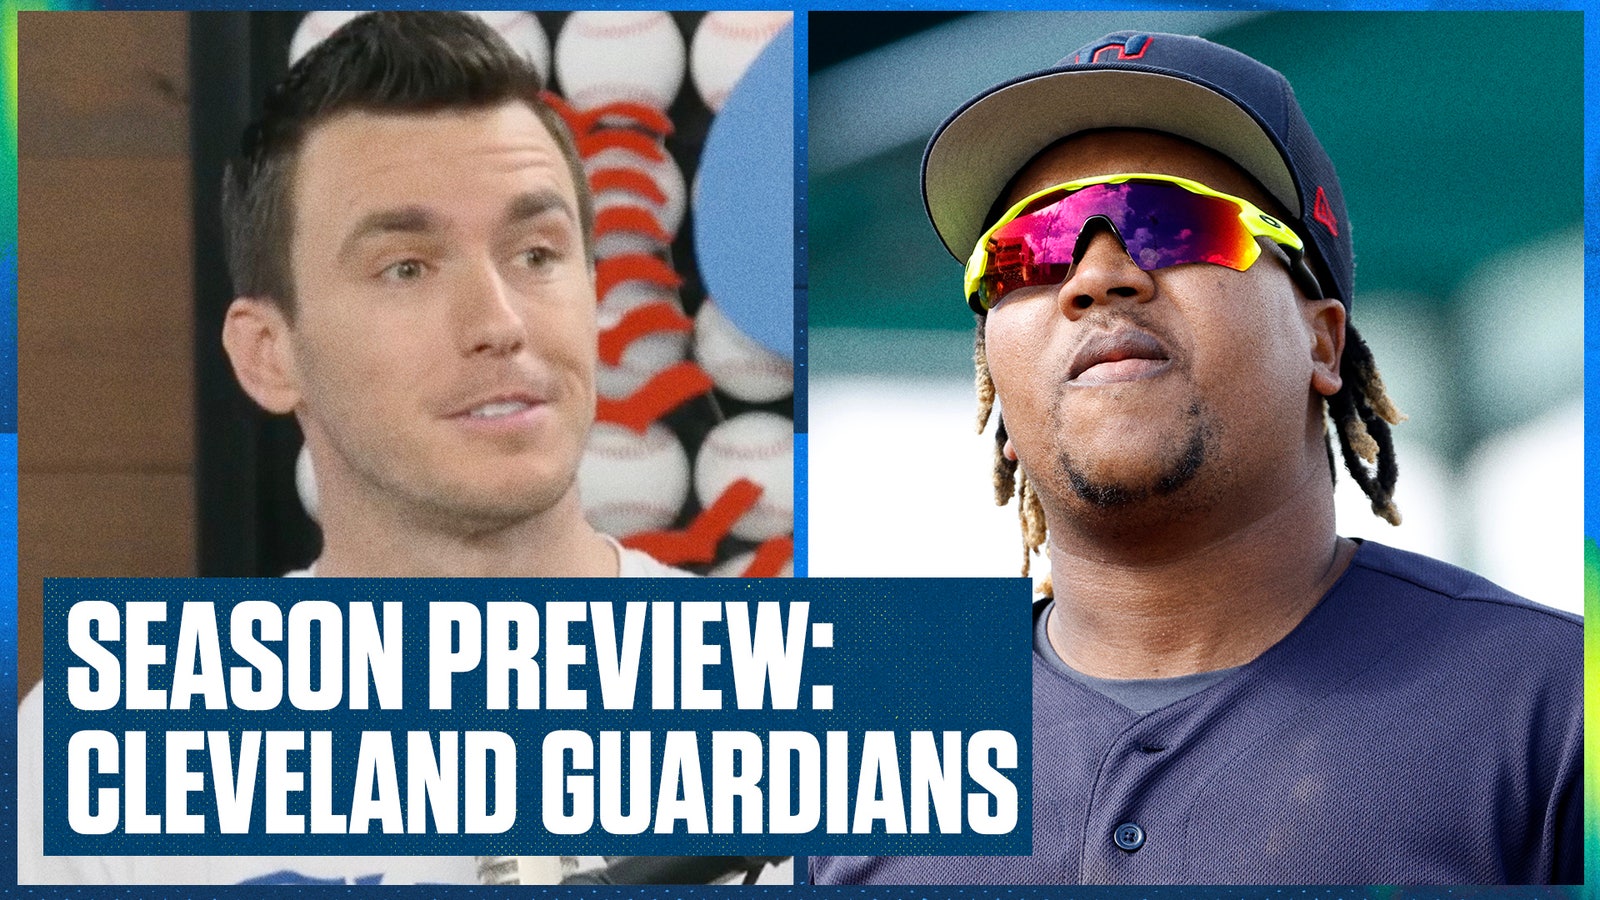 Guardians season preview: Can they repeat last year's success?